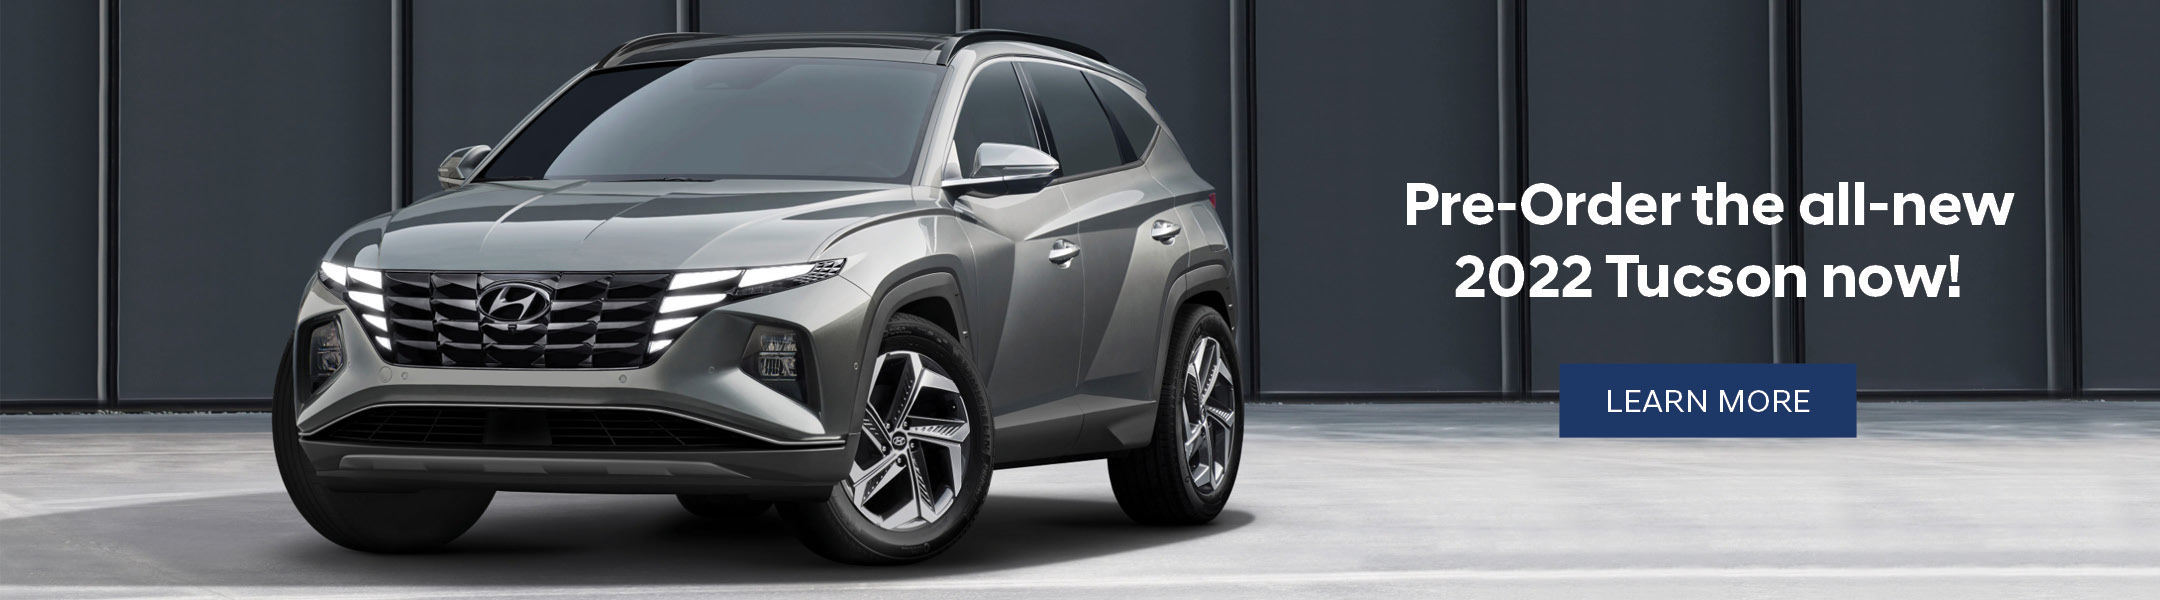 Pre-Order the all-new 2022 Tucson